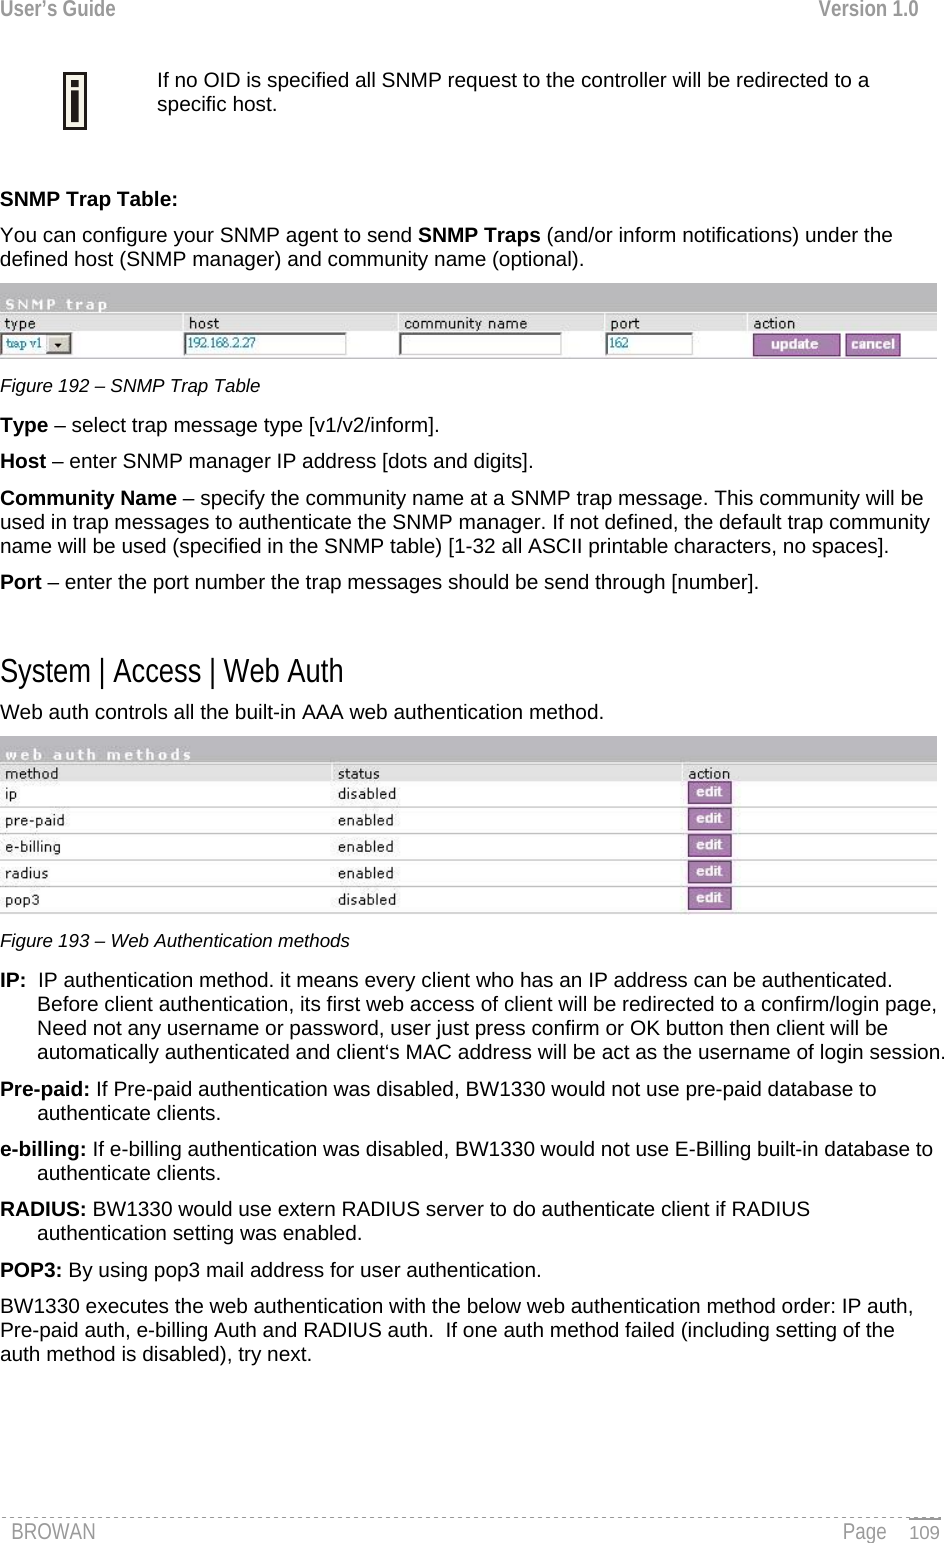 User’s Guide  Version 1.0  If no OID is specified all SNMP request to the controller will be redirected to a specific host.   SNMP Trap Table: You can configure your SNMP agent to send SNMP Traps (and/or inform notifications) under the defined host (SNMP manager) and community name (optional).  Figure 192 – SNMP Trap Table Type – select trap message type [v1/v2/inform]. Host – enter SNMP manager IP address [dots and digits]. Community Name – specify the community name at a SNMP trap message. This community will be used in trap messages to authenticate the SNMP manager. If not defined, the default trap community name will be used (specified in the SNMP table) [1-32 all ASCII printable characters, no spaces]. Port – enter the port number the trap messages should be send through [number].  System | Access | Web Auth Web auth controls all the built-in AAA web authentication method.   Figure 193 – Web Authentication methods IP:  IP authentication method. it means every client who has an IP address can be authenticated. Before client authentication, its first web access of client will be redirected to a confirm/login page, Need not any username or password, user just press confirm or OK button then client will be automatically authenticated and client‘s MAC address will be act as the username of login session. Pre-paid: If Pre-paid authentication was disabled, BW1330 would not use pre-paid database to authenticate clients. e-billing: If e-billing authentication was disabled, BW1330 would not use E-Billing built-in database to authenticate clients. RADIUS: BW1330 would use extern RADIUS server to do authenticate client if RADIUS authentication setting was enabled.  POP3: By using pop3 mail address for user authentication. BW1330 executes the web authentication with the below web authentication method order: IP auth, Pre-paid auth, e-billing Auth and RADIUS auth.  If one auth method failed (including setting of the auth method is disabled), try next.   BROWAN                                                                                                                                               Page   109